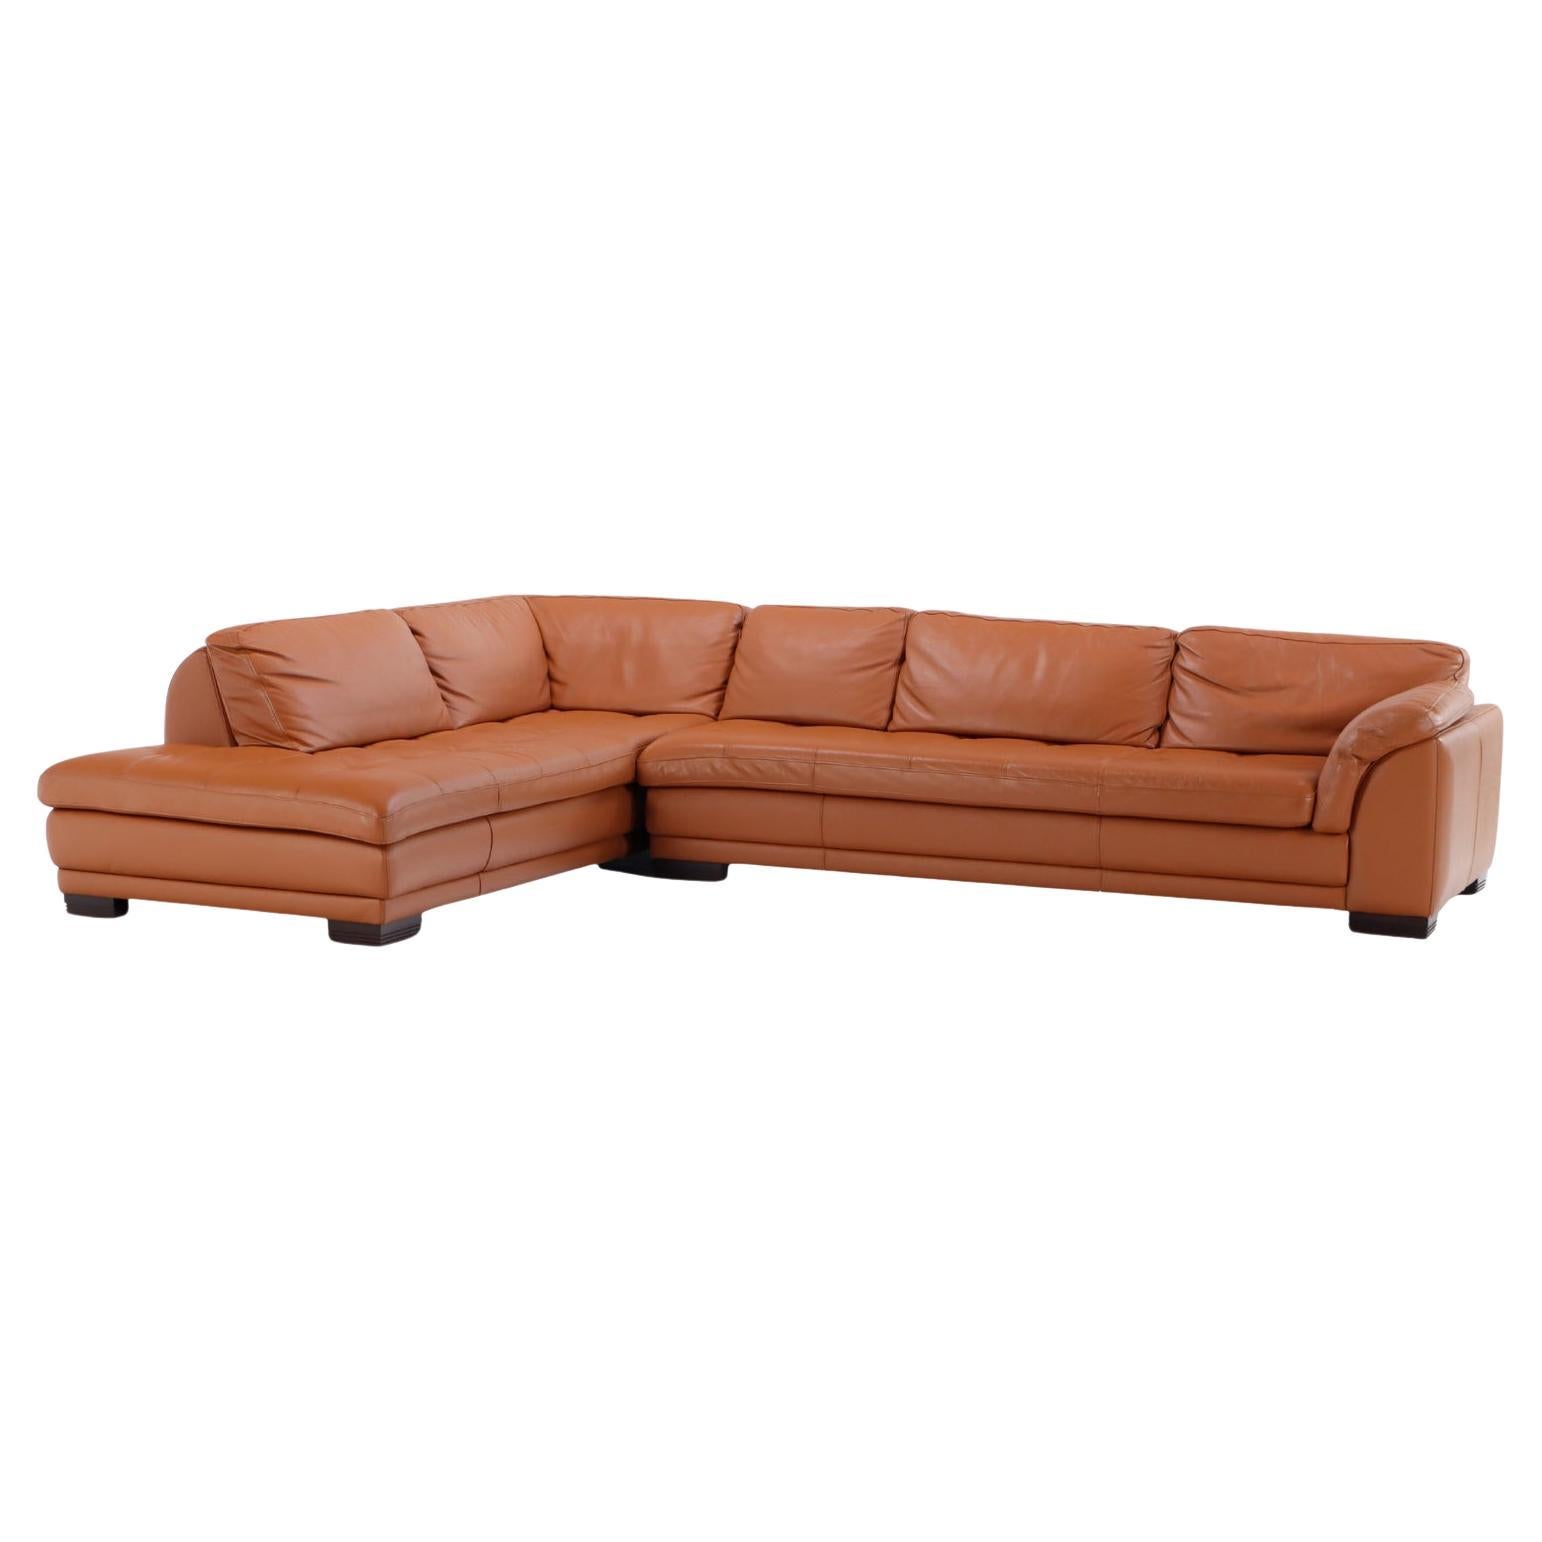 A French Roche Bobois leather sectional sofa.